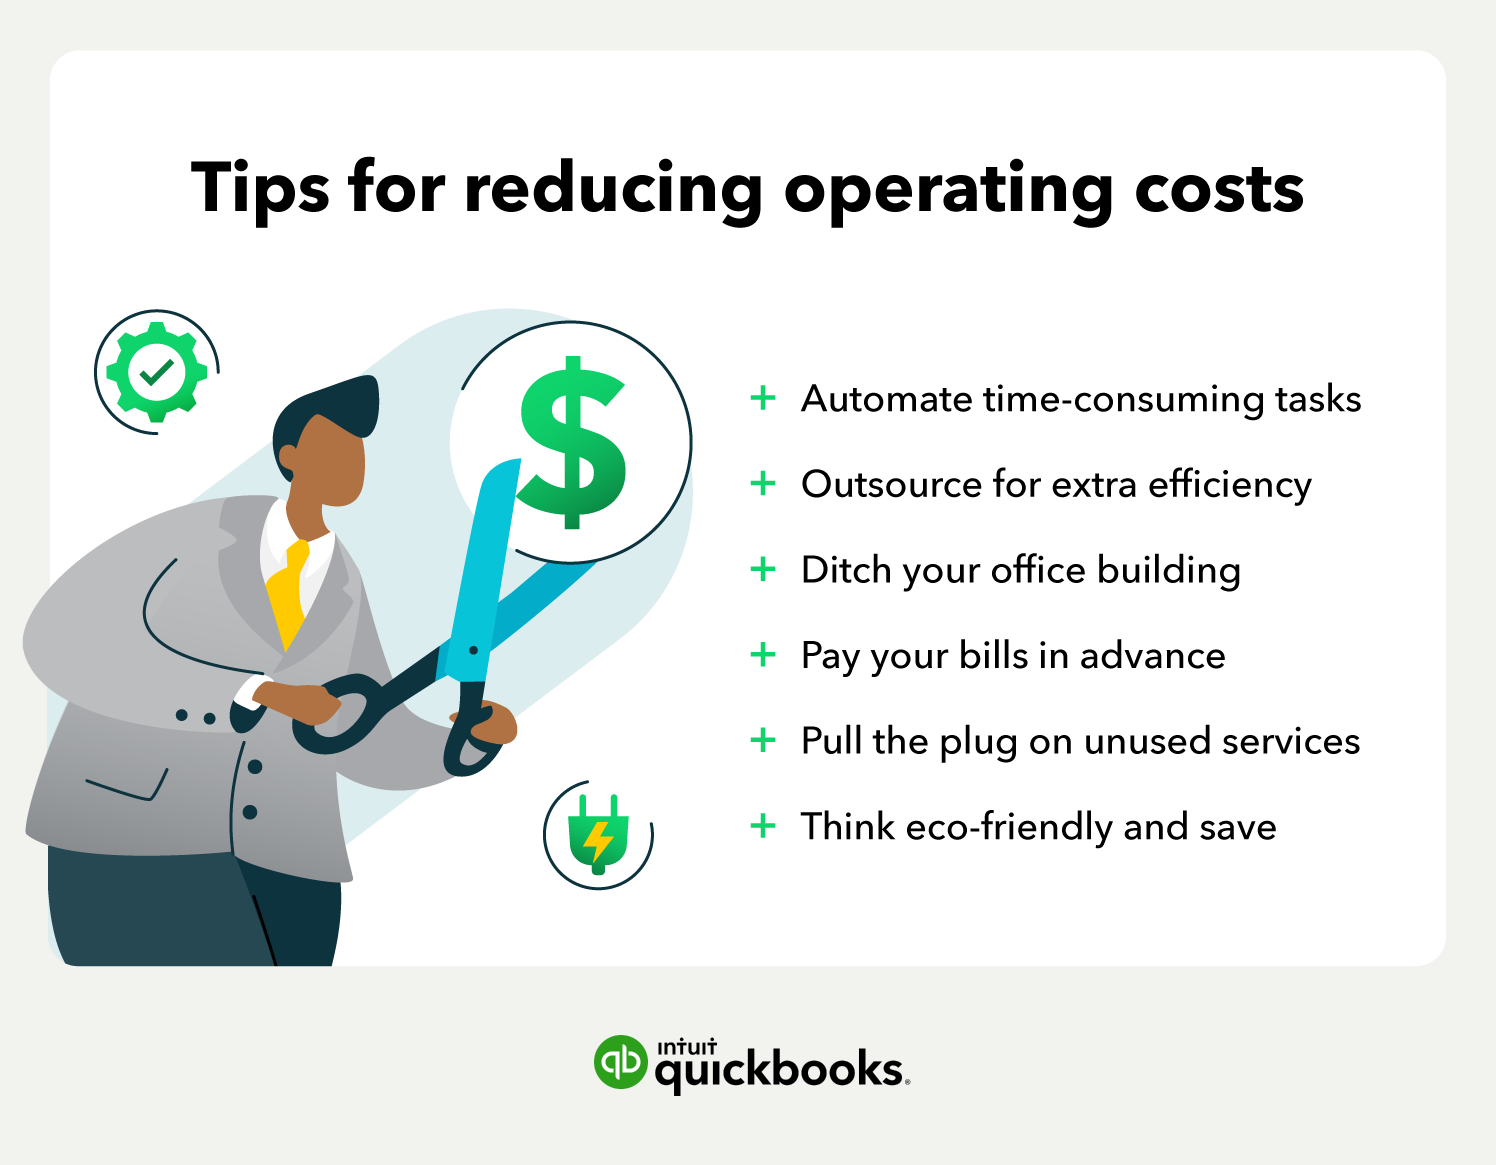 Tips for reducing operating costs with a man using scissors to cut a dollar sign in half